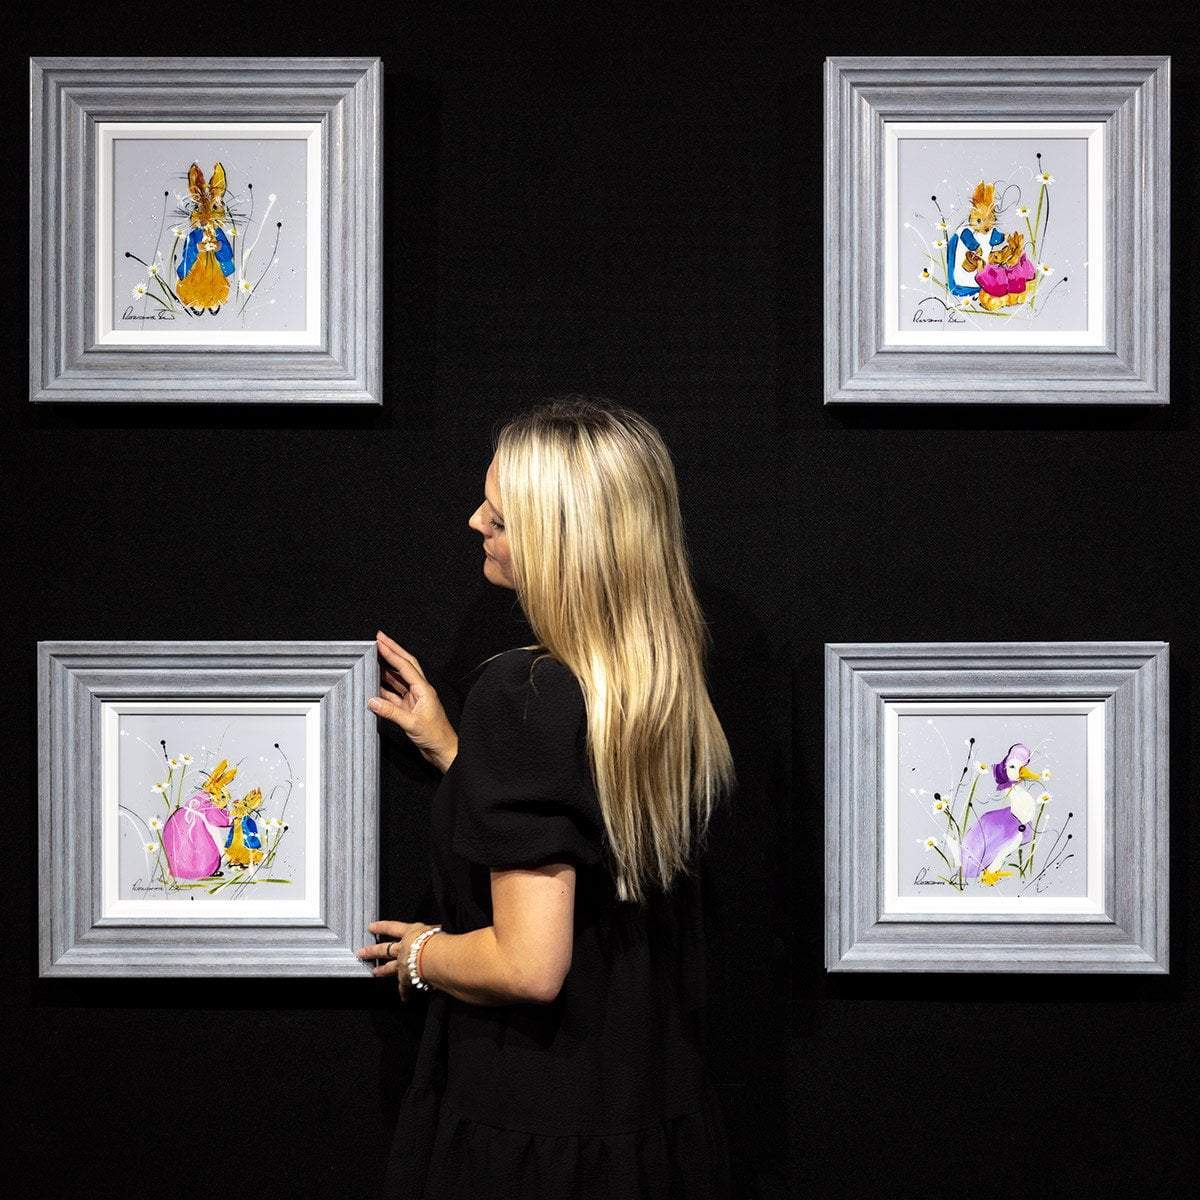 Even The Smallest One Can Change The World - Original Set of 4 Rozanne Bell